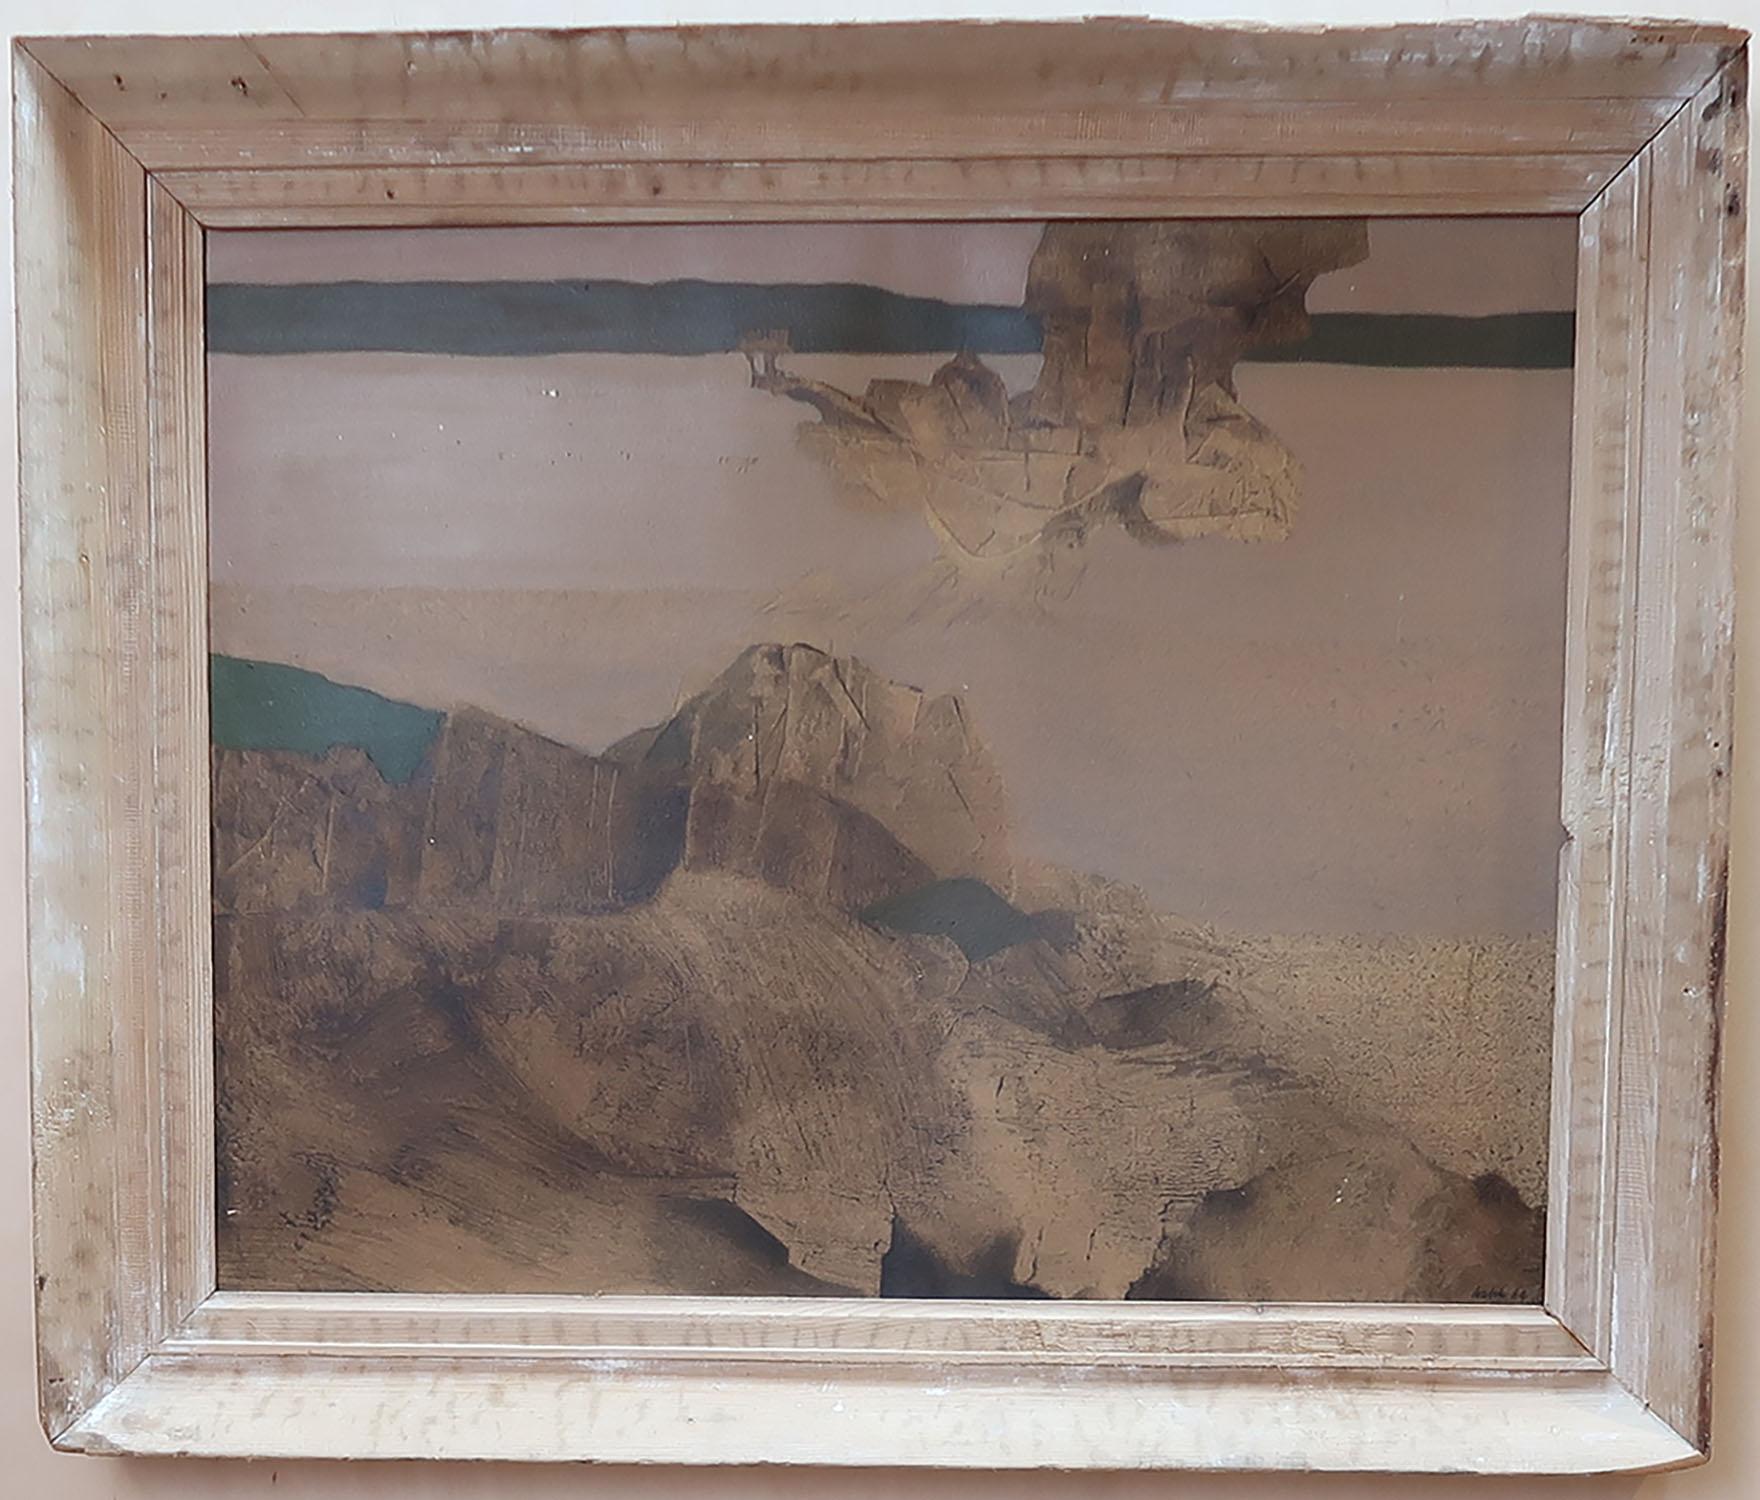 Wonderful abstract landscape.

Mixed medium on paper

Signed by David Walsh* lower right.

Presented in an antique distressed pine frame.

*resident of Ibiza, Spain. Exhibited extensively mainly in Spain during the 1960's and